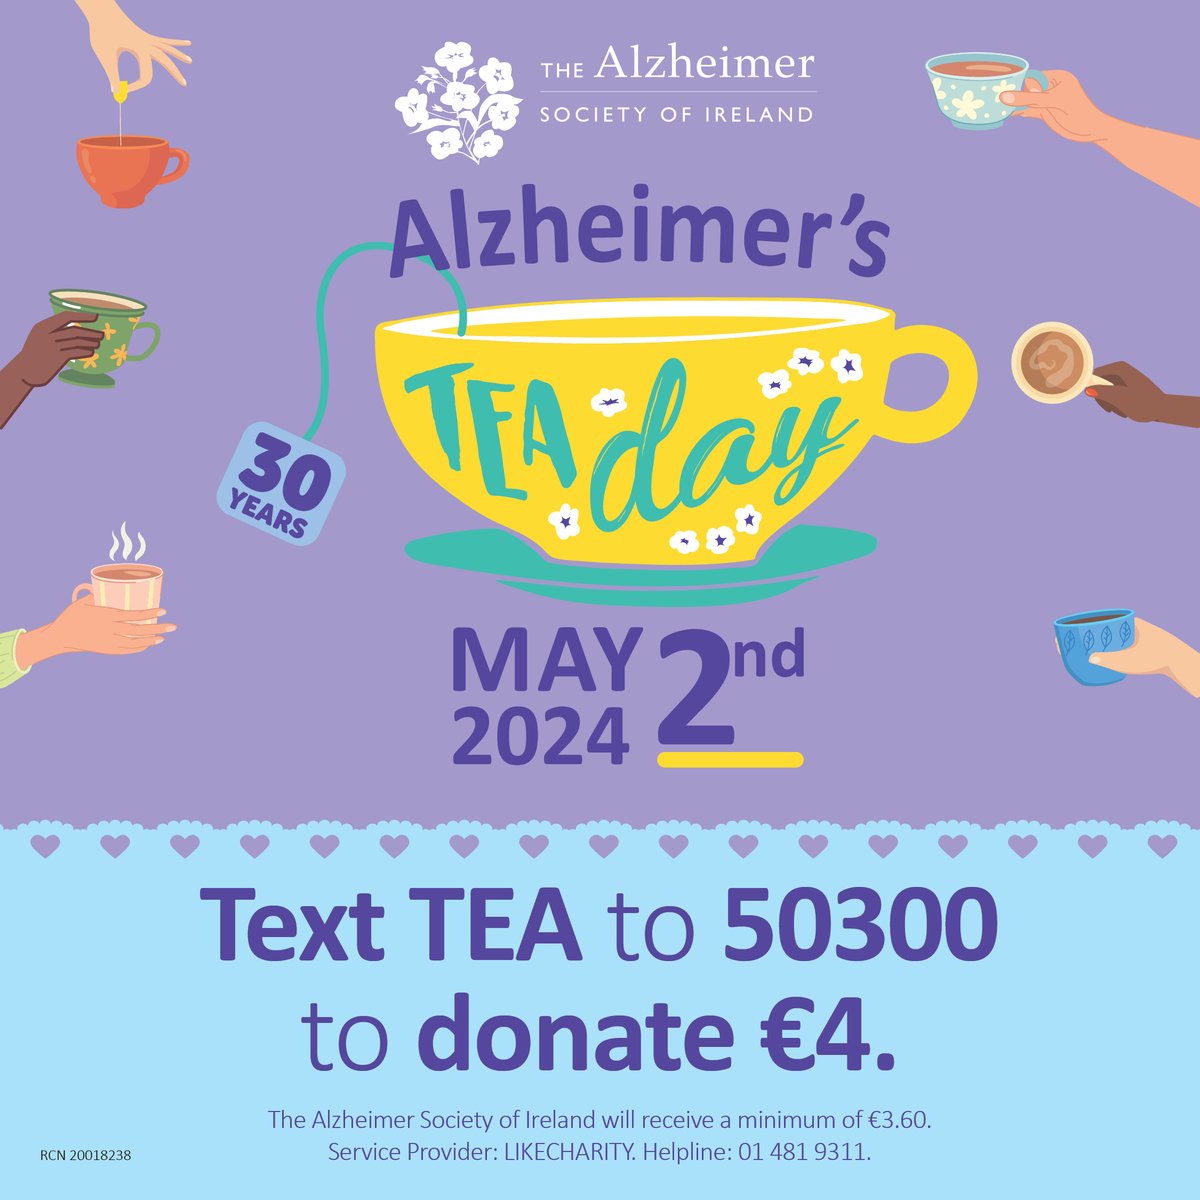 If you missed registering for #TeaDay2024, you can still support us through text donate. Text TEA to 50300 to donate €4. The Alzheimer Society of Ireland will receive a minimum of €3.60. Service Provider: LIKECHARITY. Helpline: 01 481 9311.